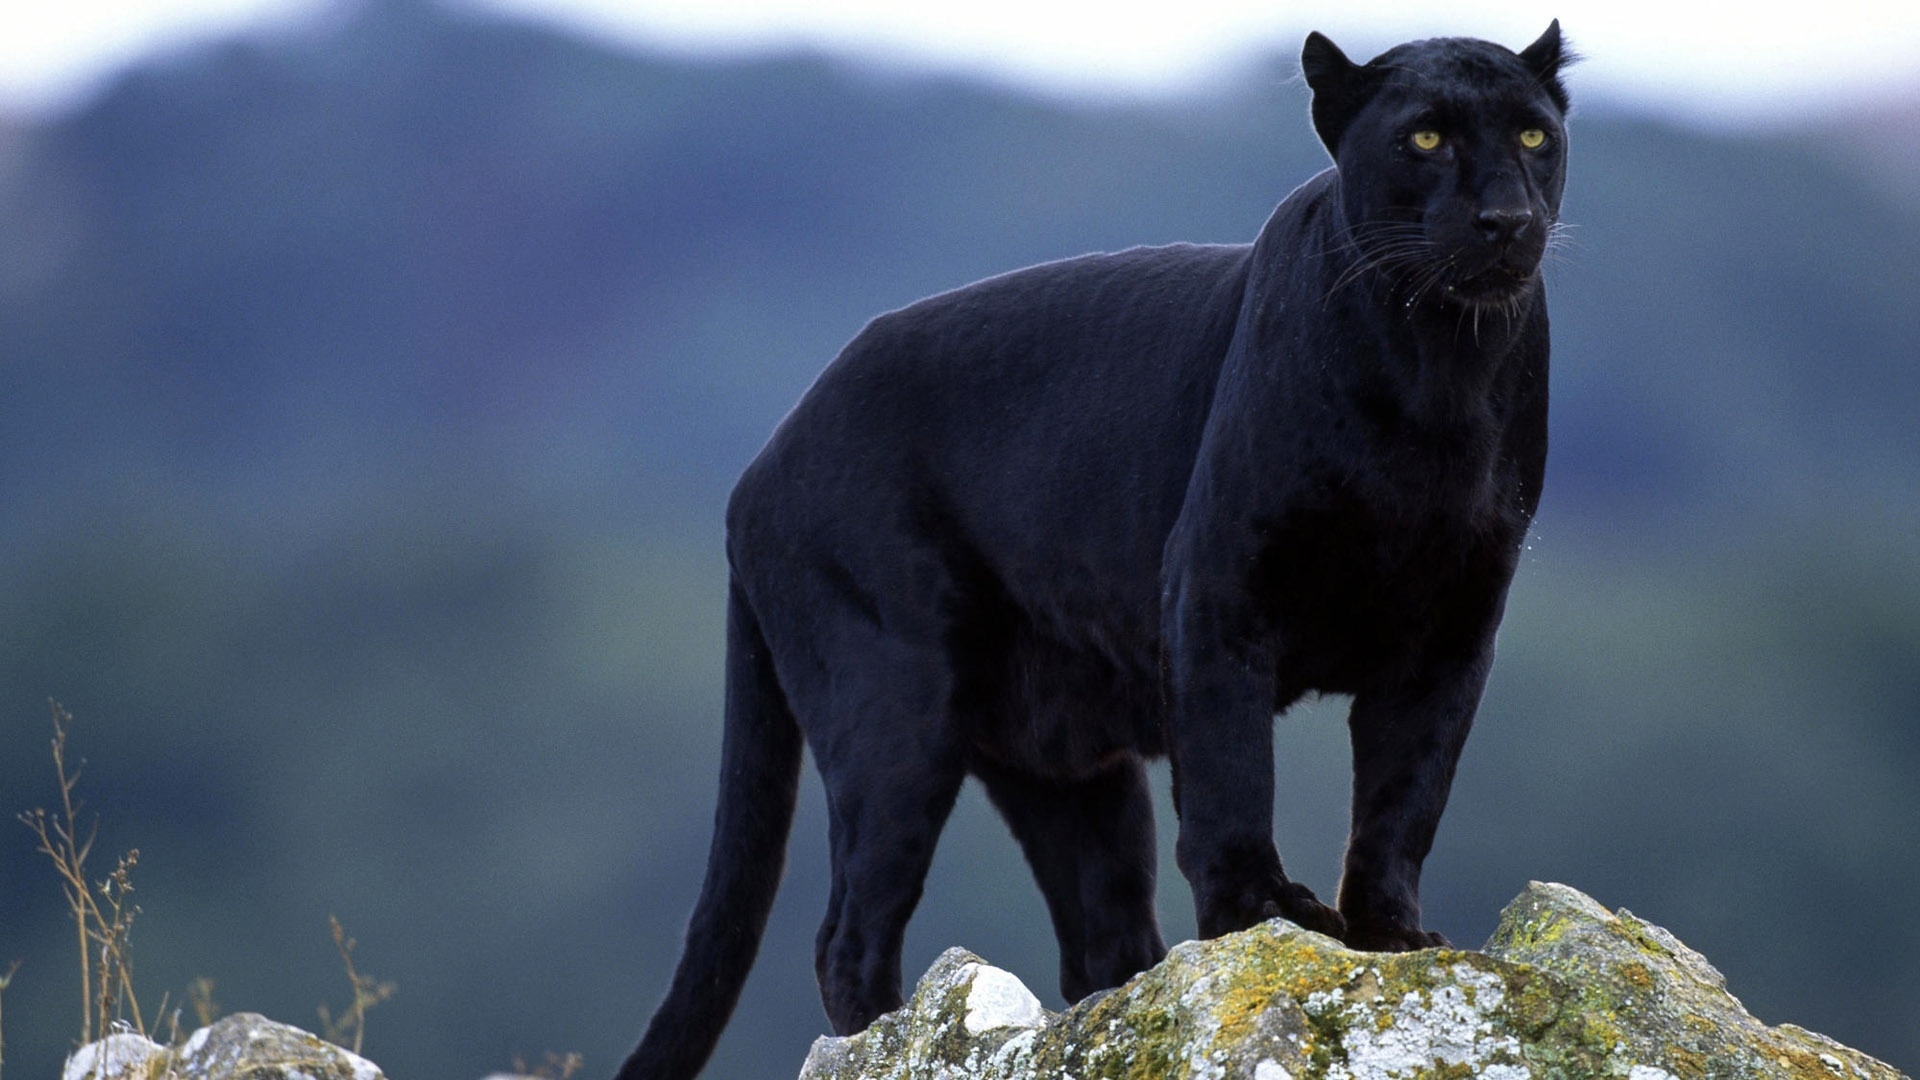 Superb Panther for 1920 x 1080 HDTV 1080p resolution